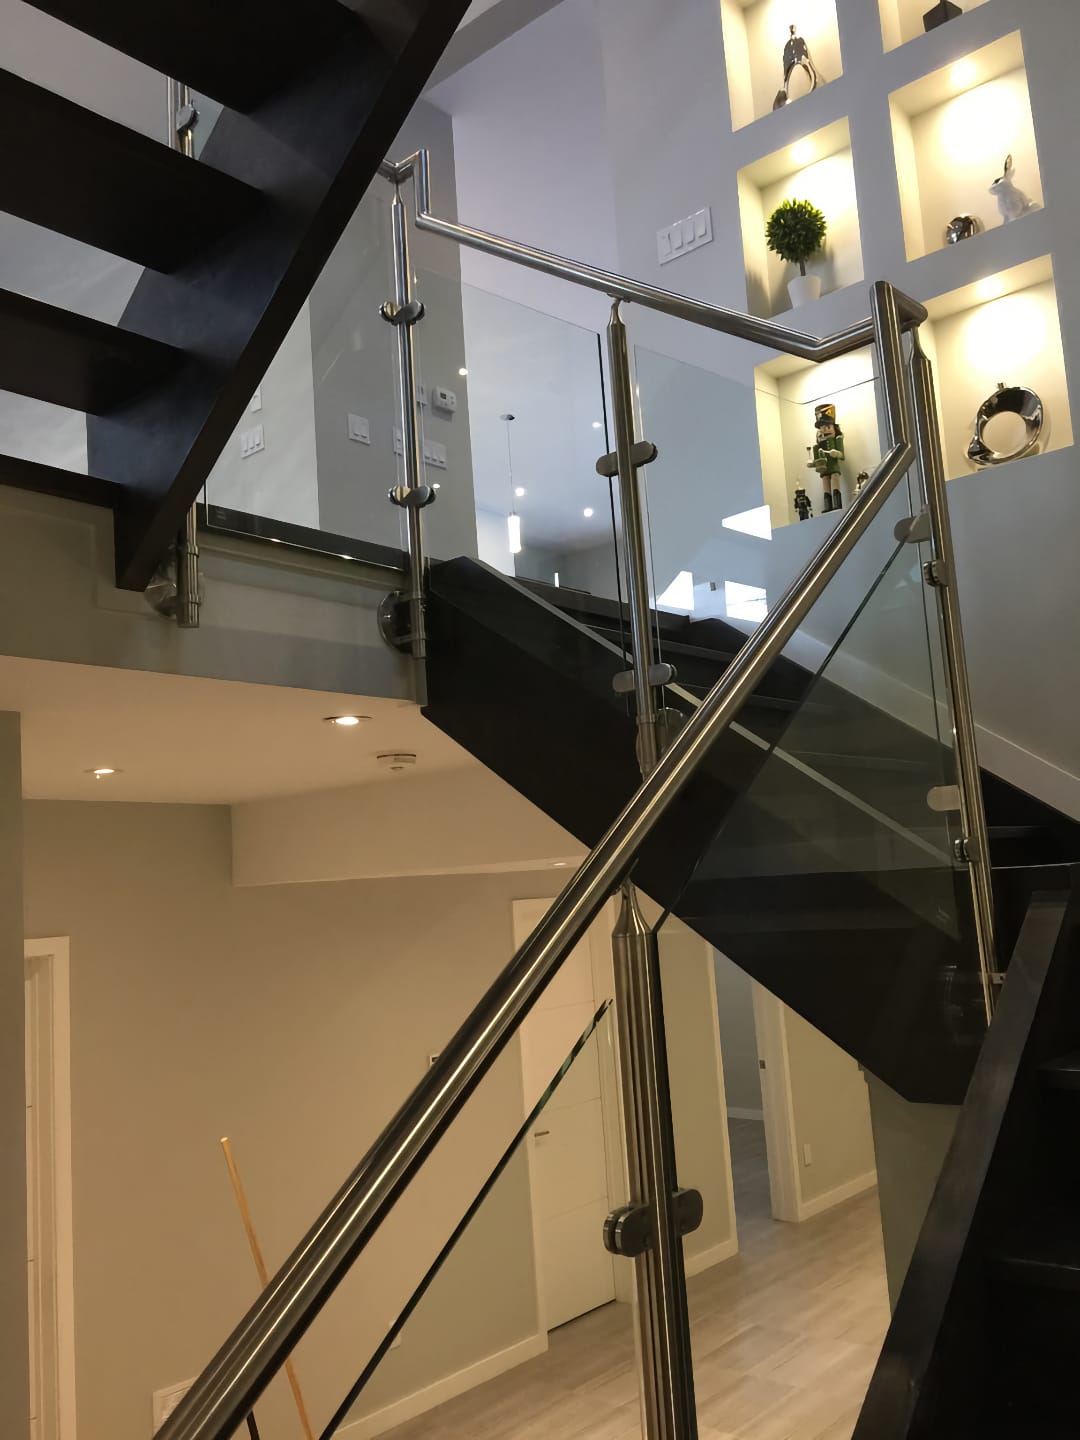 Black wooden stairs with stainless steel railing and glass